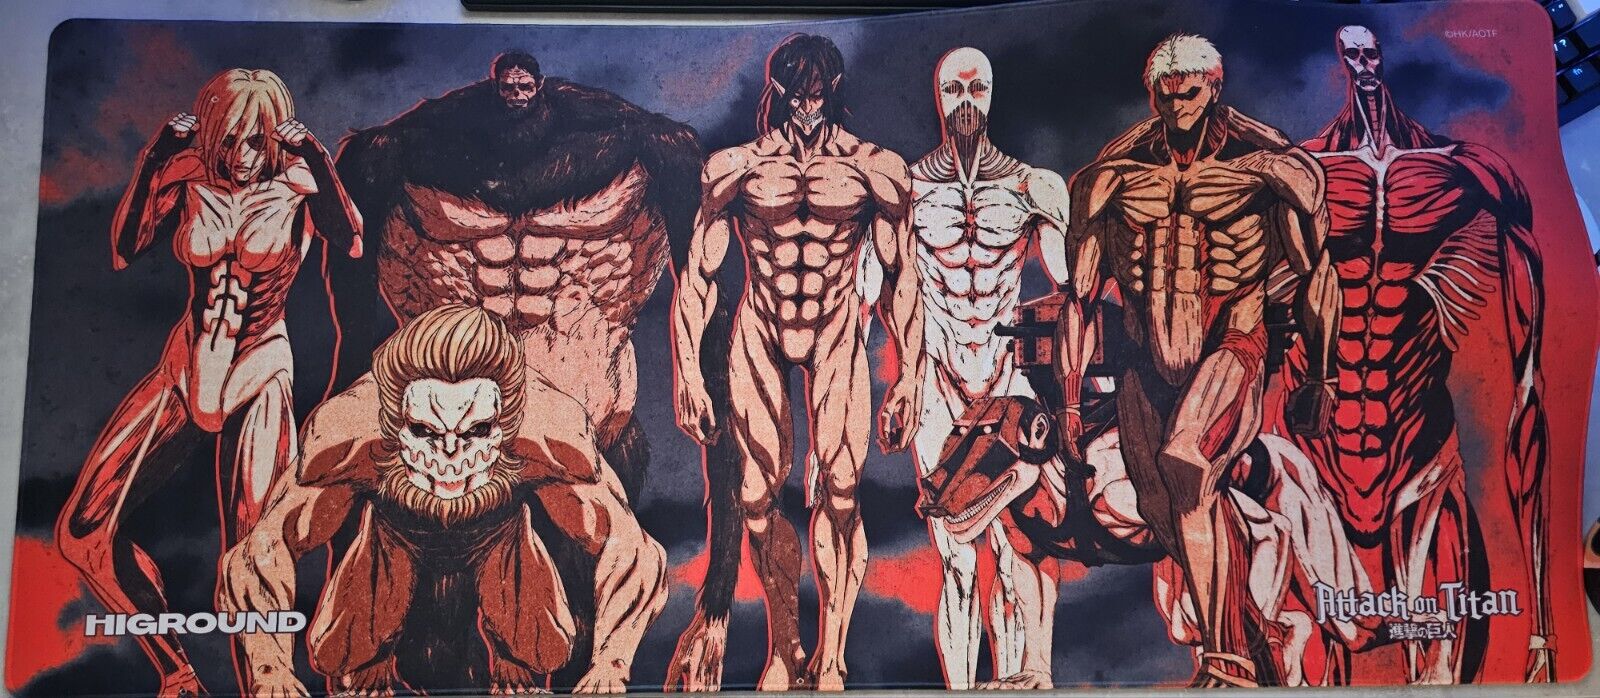 Higround Attack on Titan DESKMAT Used SOLD OUT